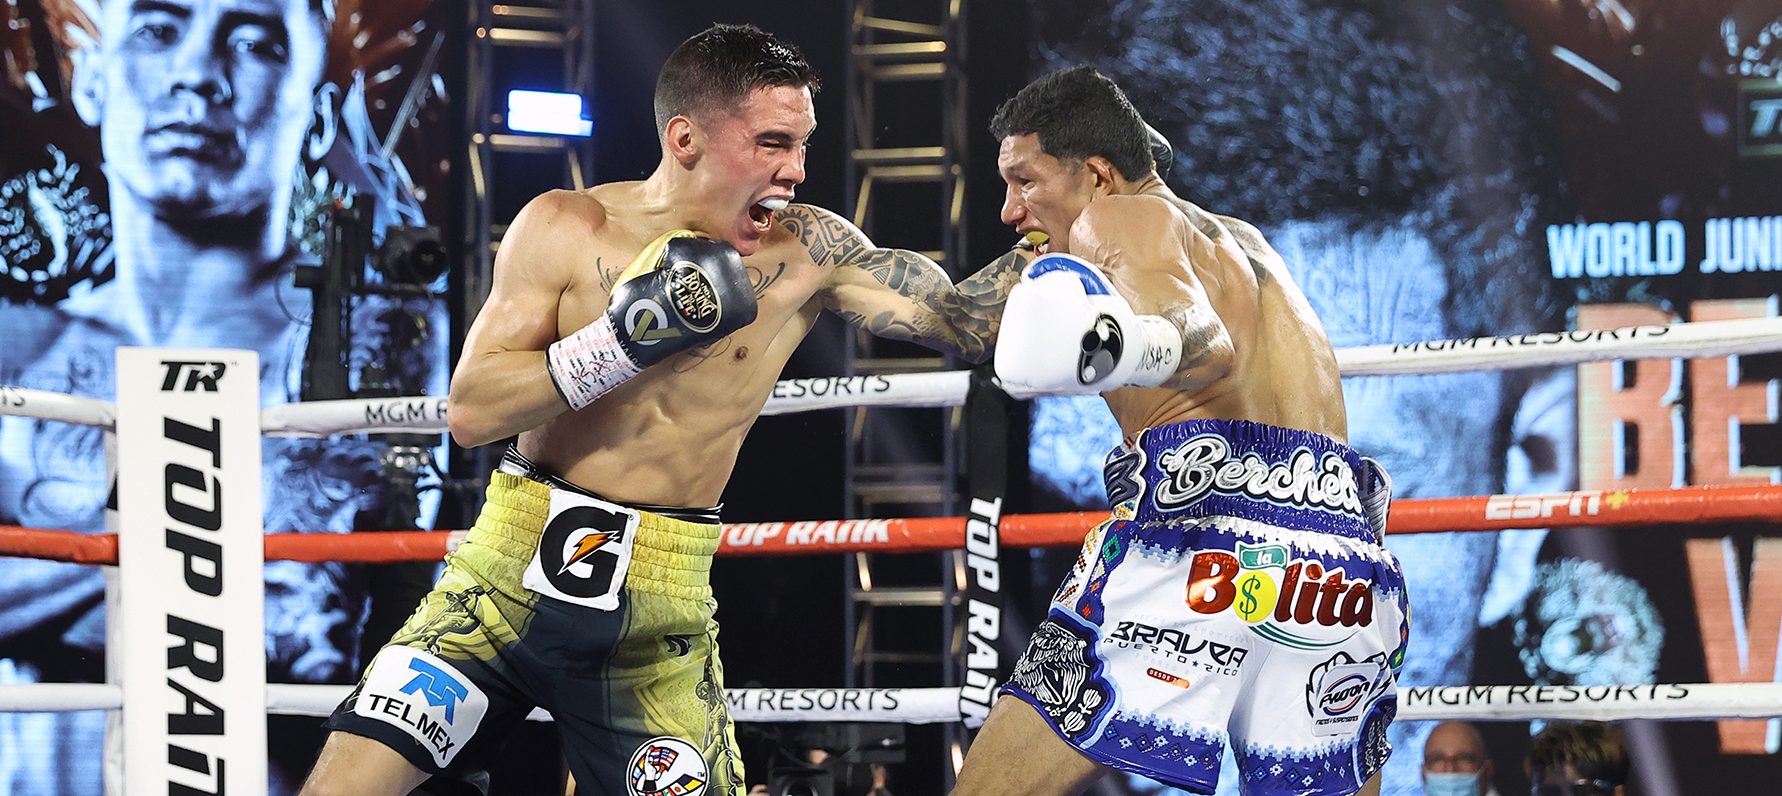 LAS VEGAS, NV - FEBRUARY 20: Miguel Berchelt and Oscar Valdez (left) exchange punches during their fight for the WBC super featherweight title at the MGM Grand Conference Center on February 20, 2021 in Las Vegas, Nevada. (Photo by Mikey Williams/Top Rank Inc via Getty Images)